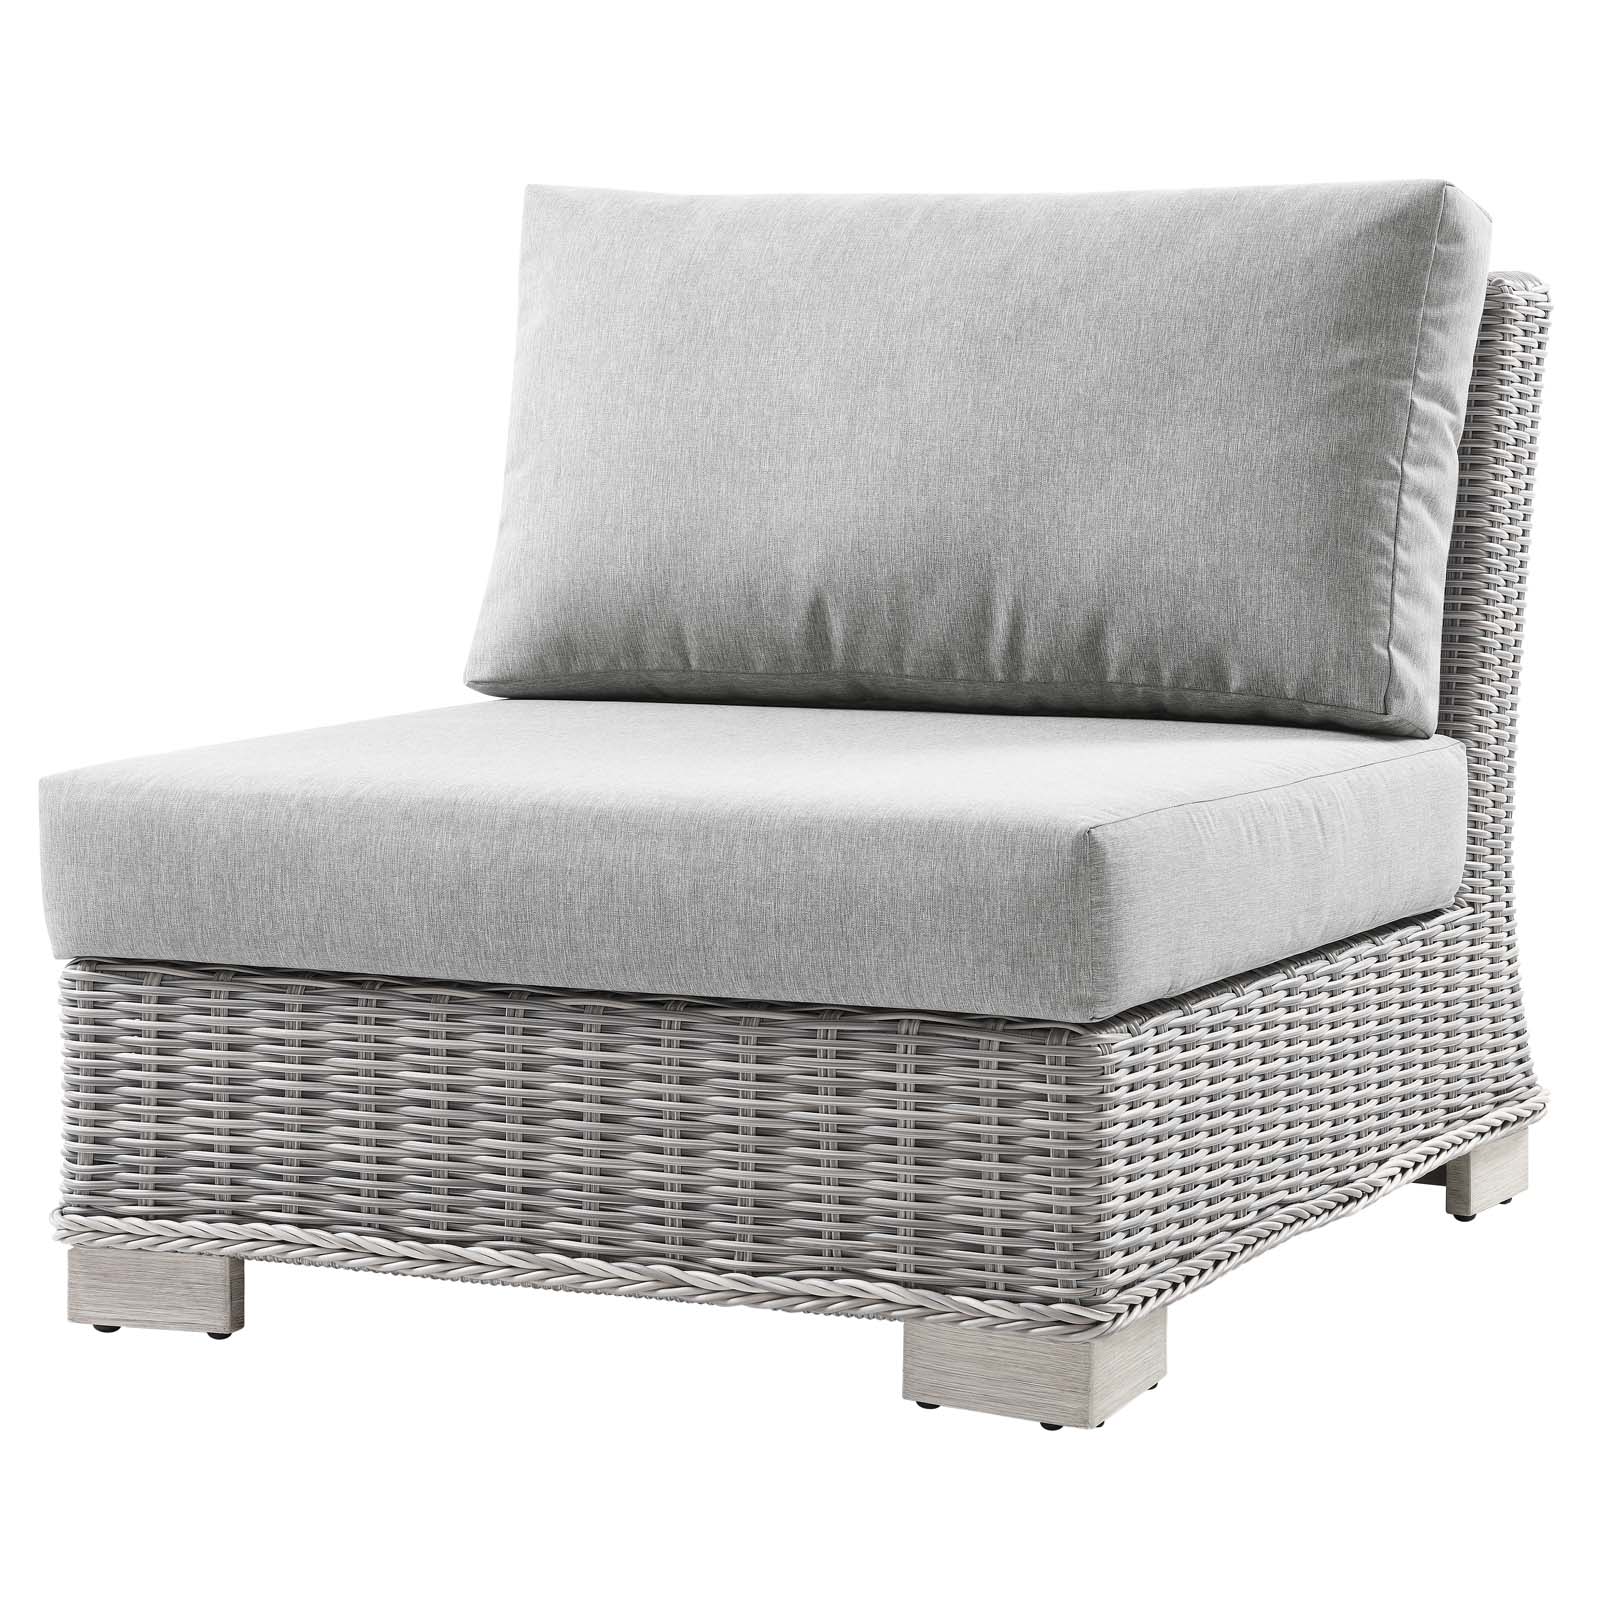 Lounge Sectional Sofa Chair Table Set, Rattan, Wicker, Grey Gray, Modern Contemporary Urban Design, Outdoor Patio Balcony Cafe Bistro Garden Furniture Hotel Hospitality - image 3 of 10